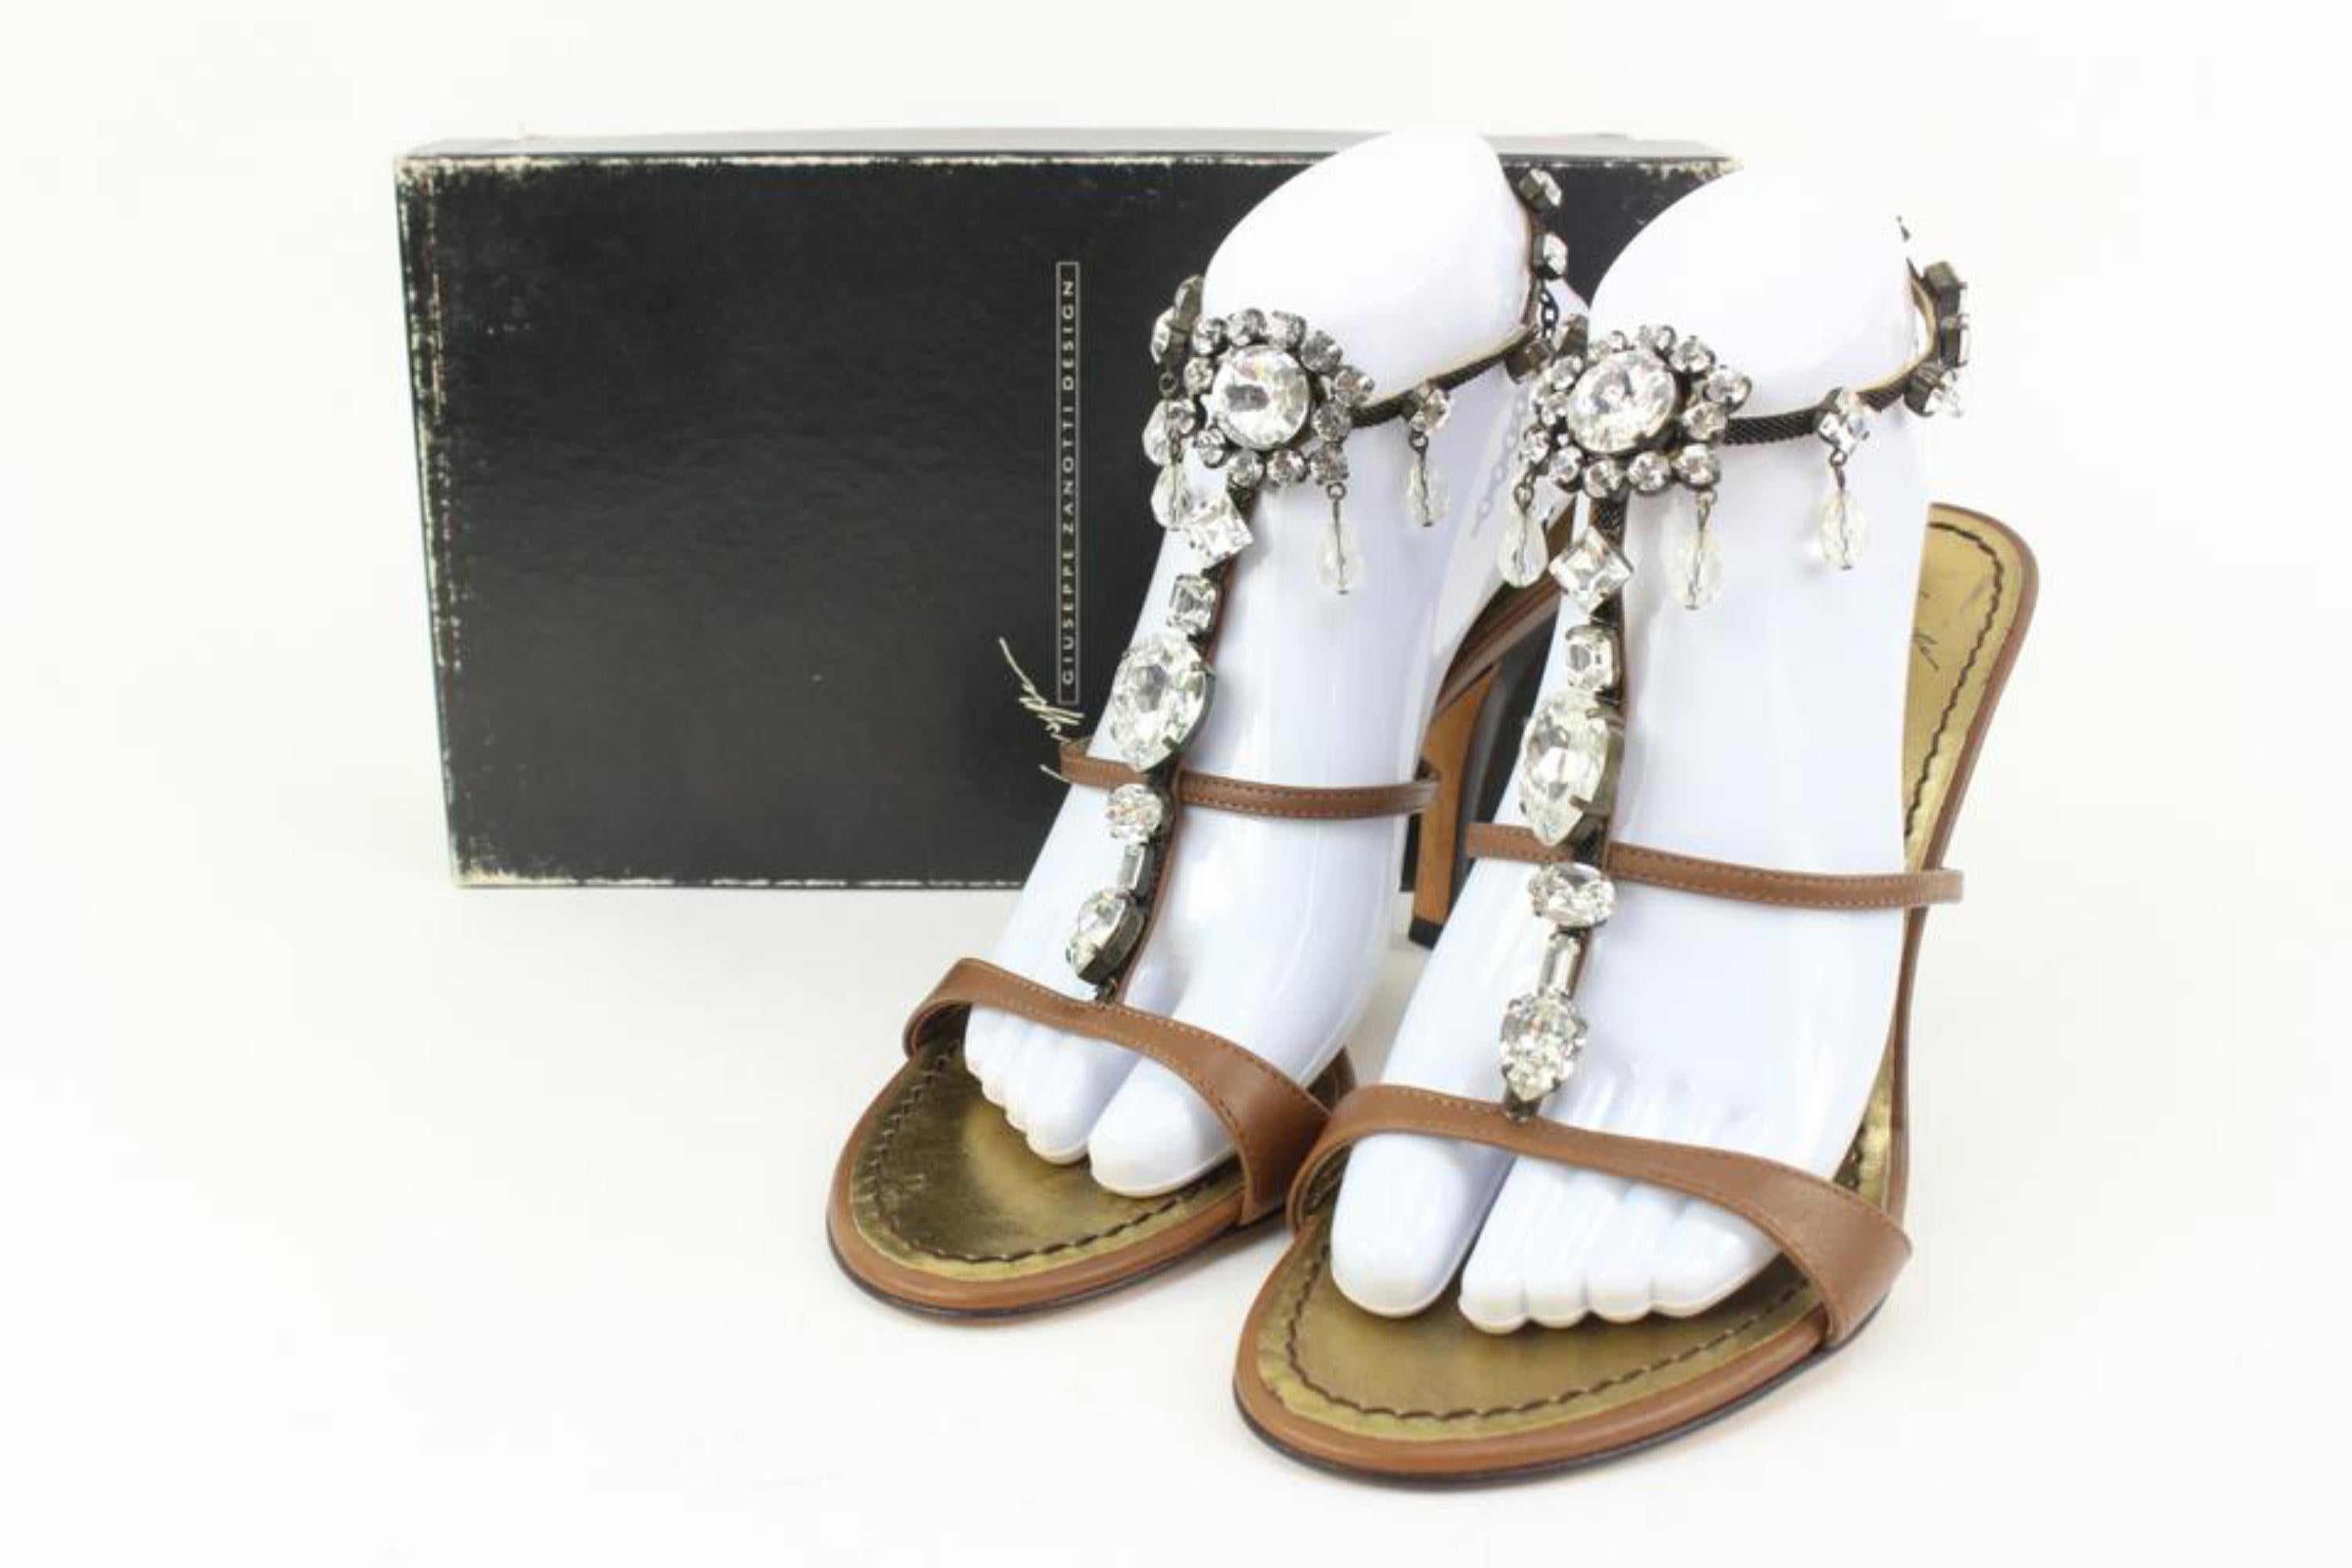 Giuseppe Zanotti Size 39.5 Birel Cocco Ella 90 Gladiator Sandal 19gz34s
Date Code/Serial Number: 60016890 (Missing Numbers Very Faded)
Made In: Italy
Measurements: Length:  9.5